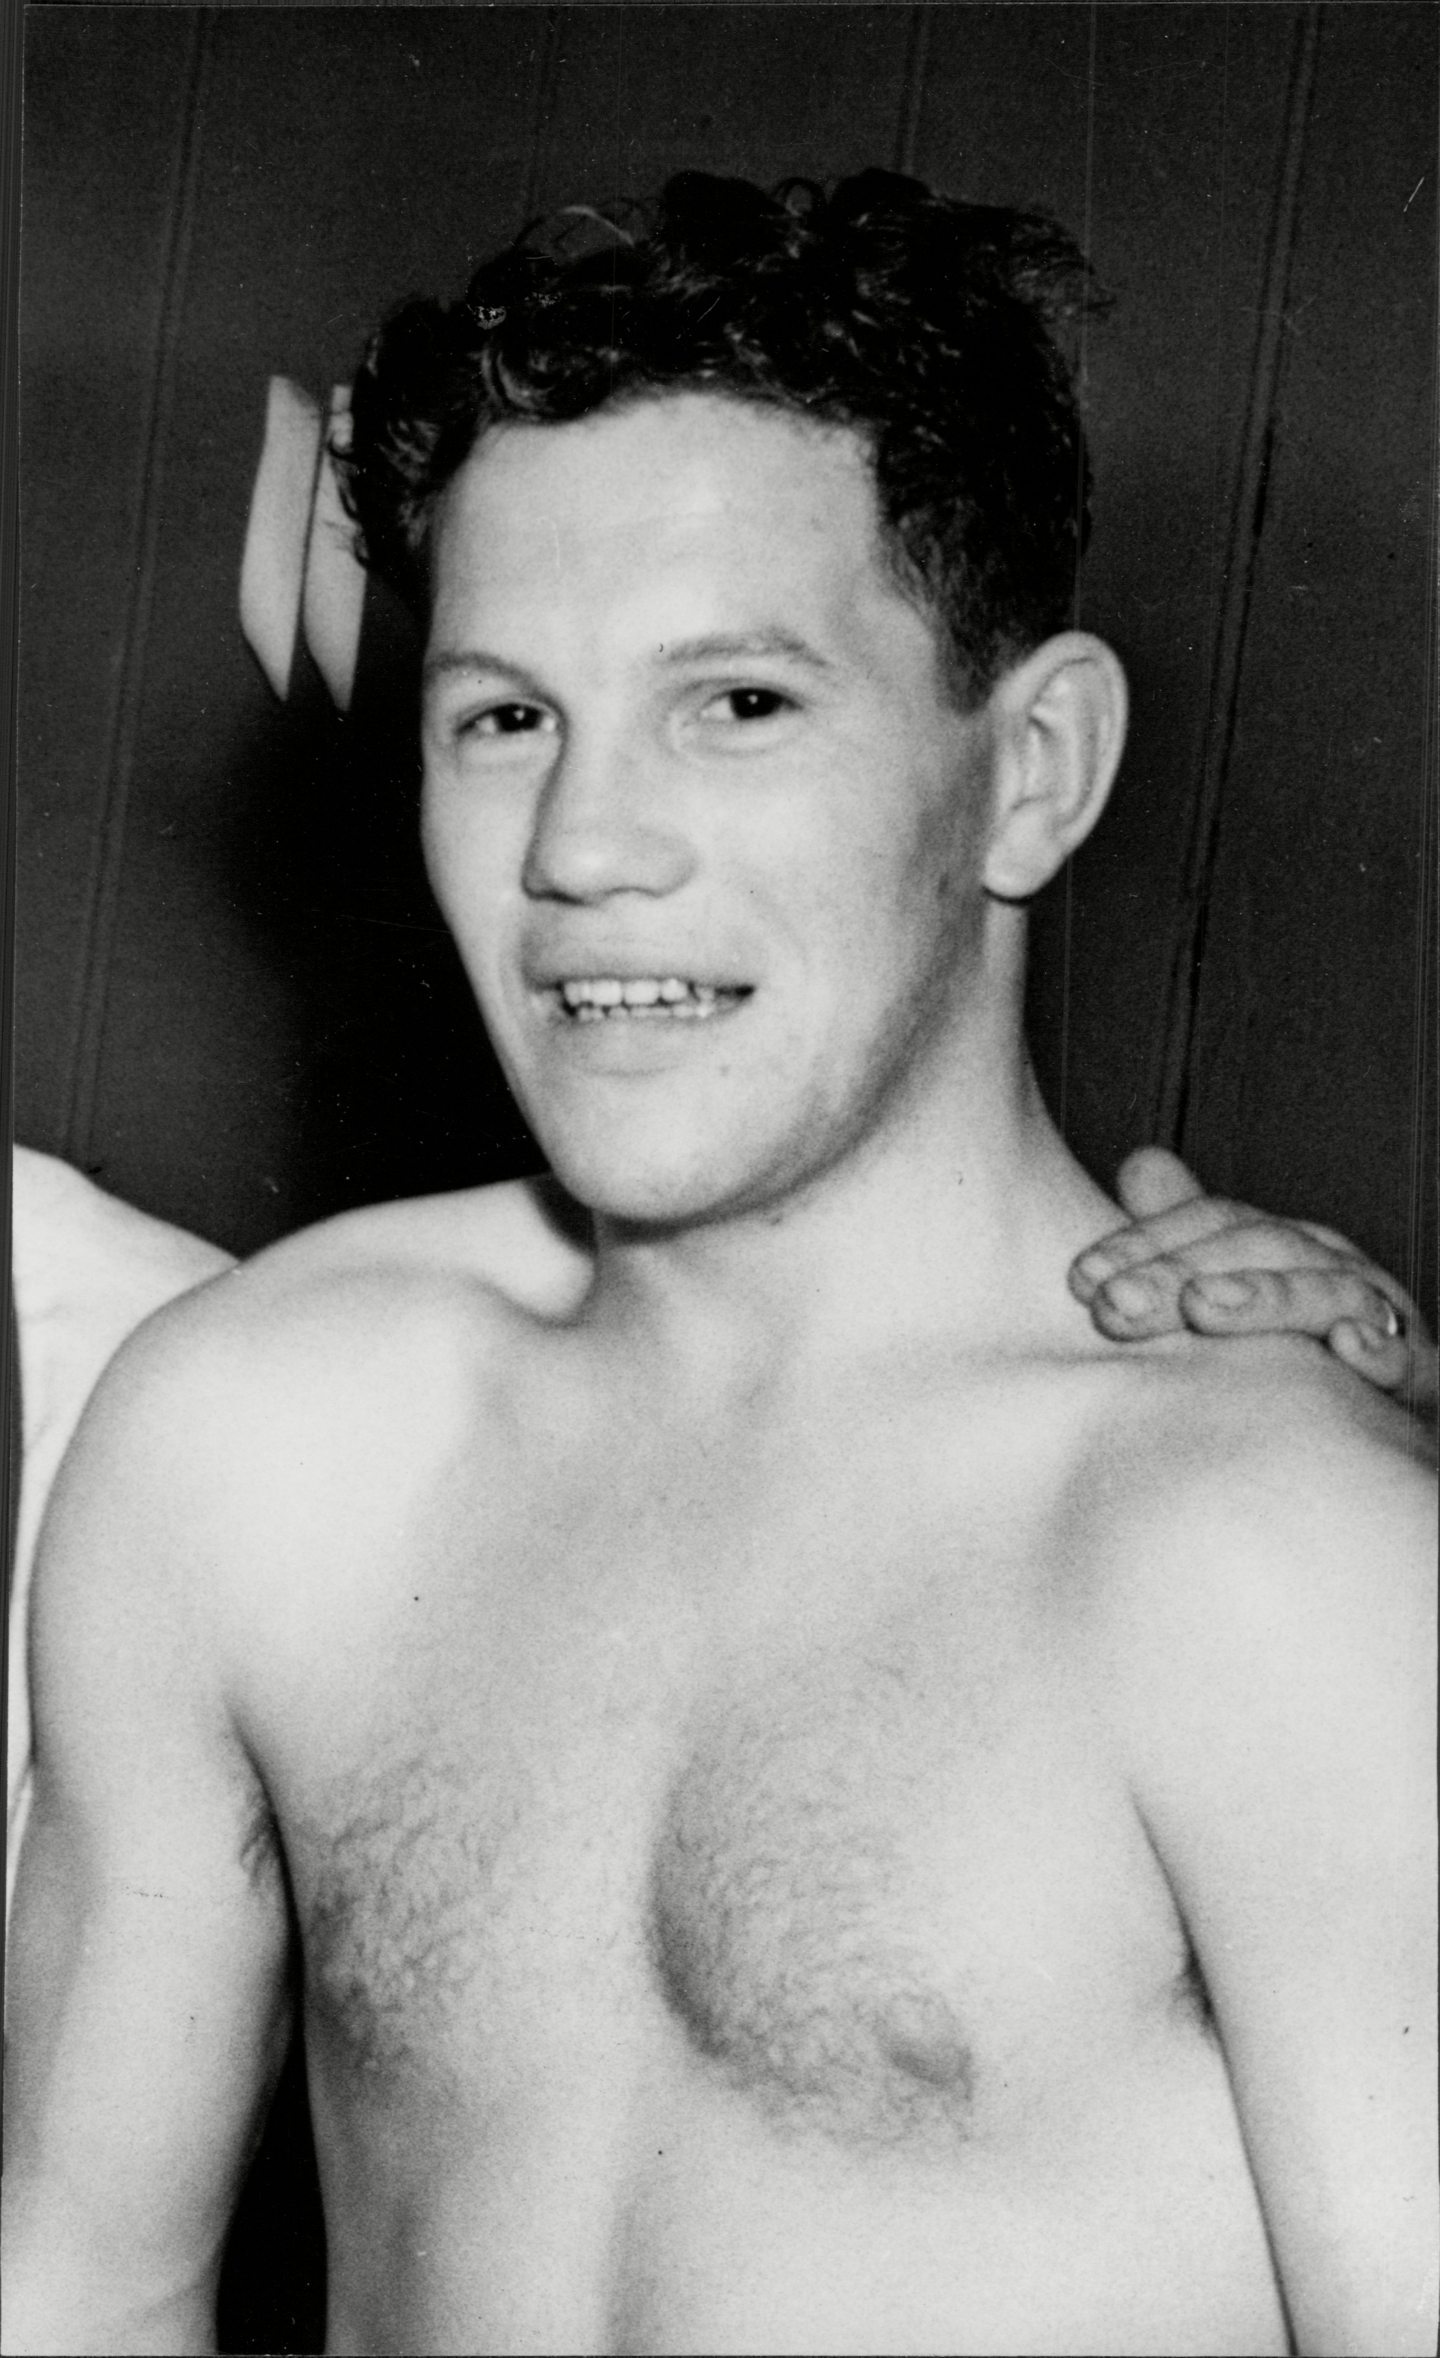 Bobby Boland, who was one of the toughest fighters during the 1940s and 1950s. Image: Shutterstock.